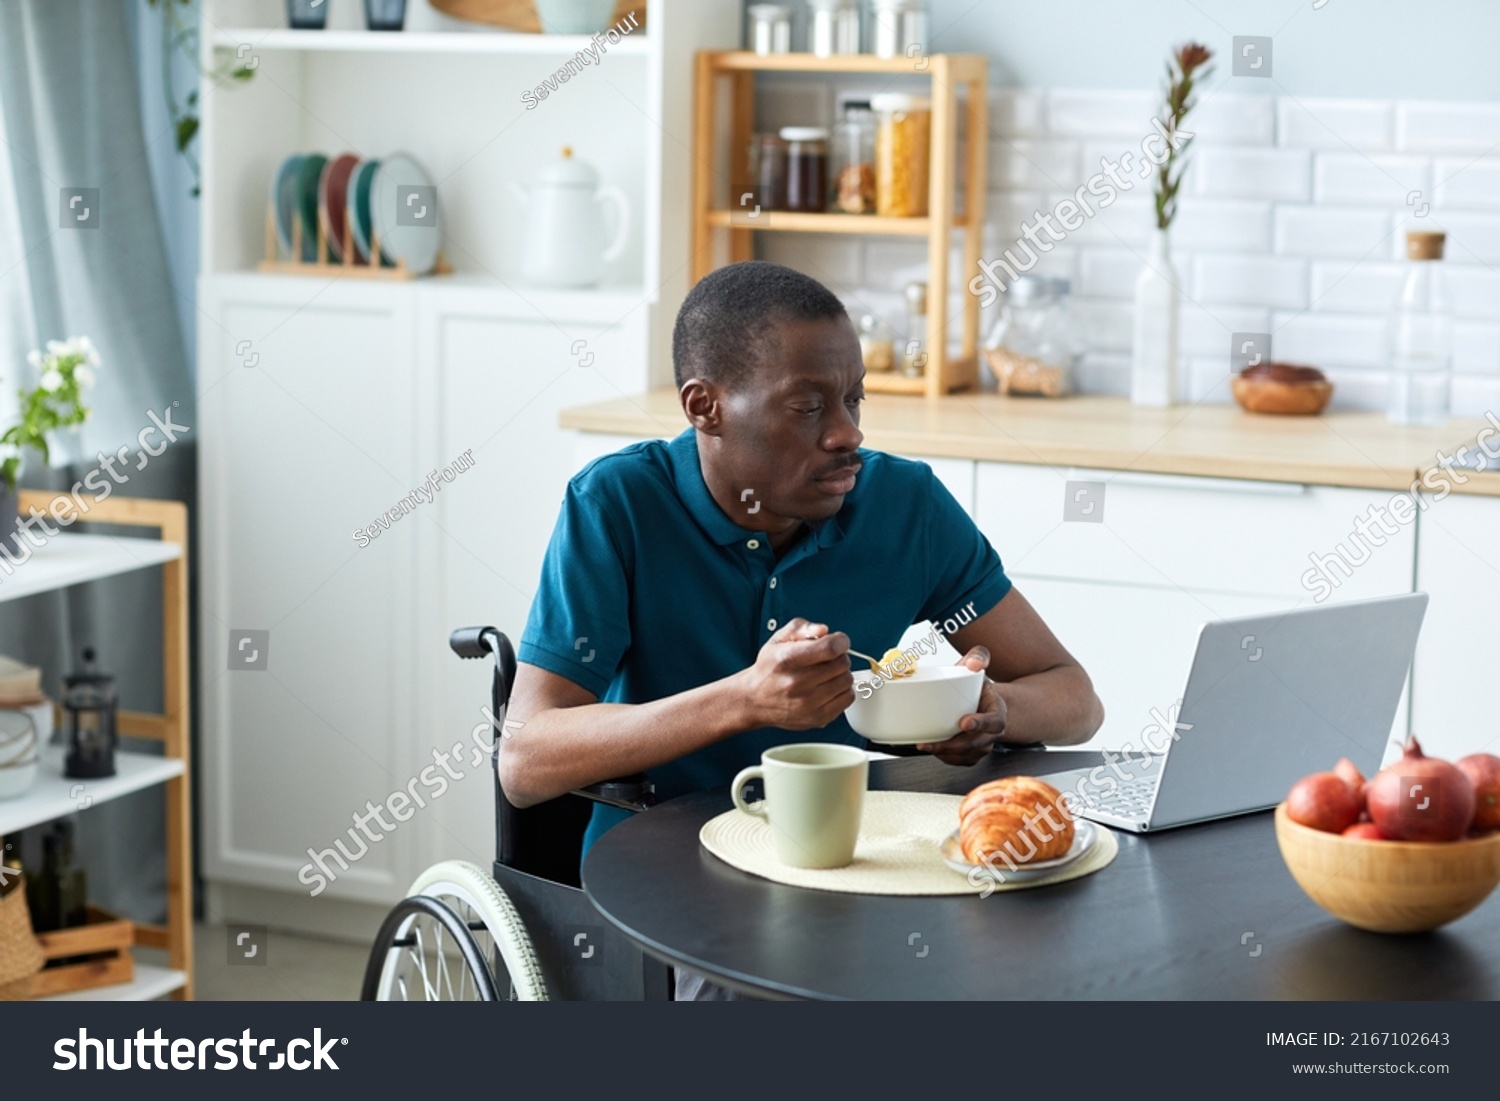 Portrait of black adult man with disability eating breakfast at table in kitchen and watching videos, copy space #2167102643